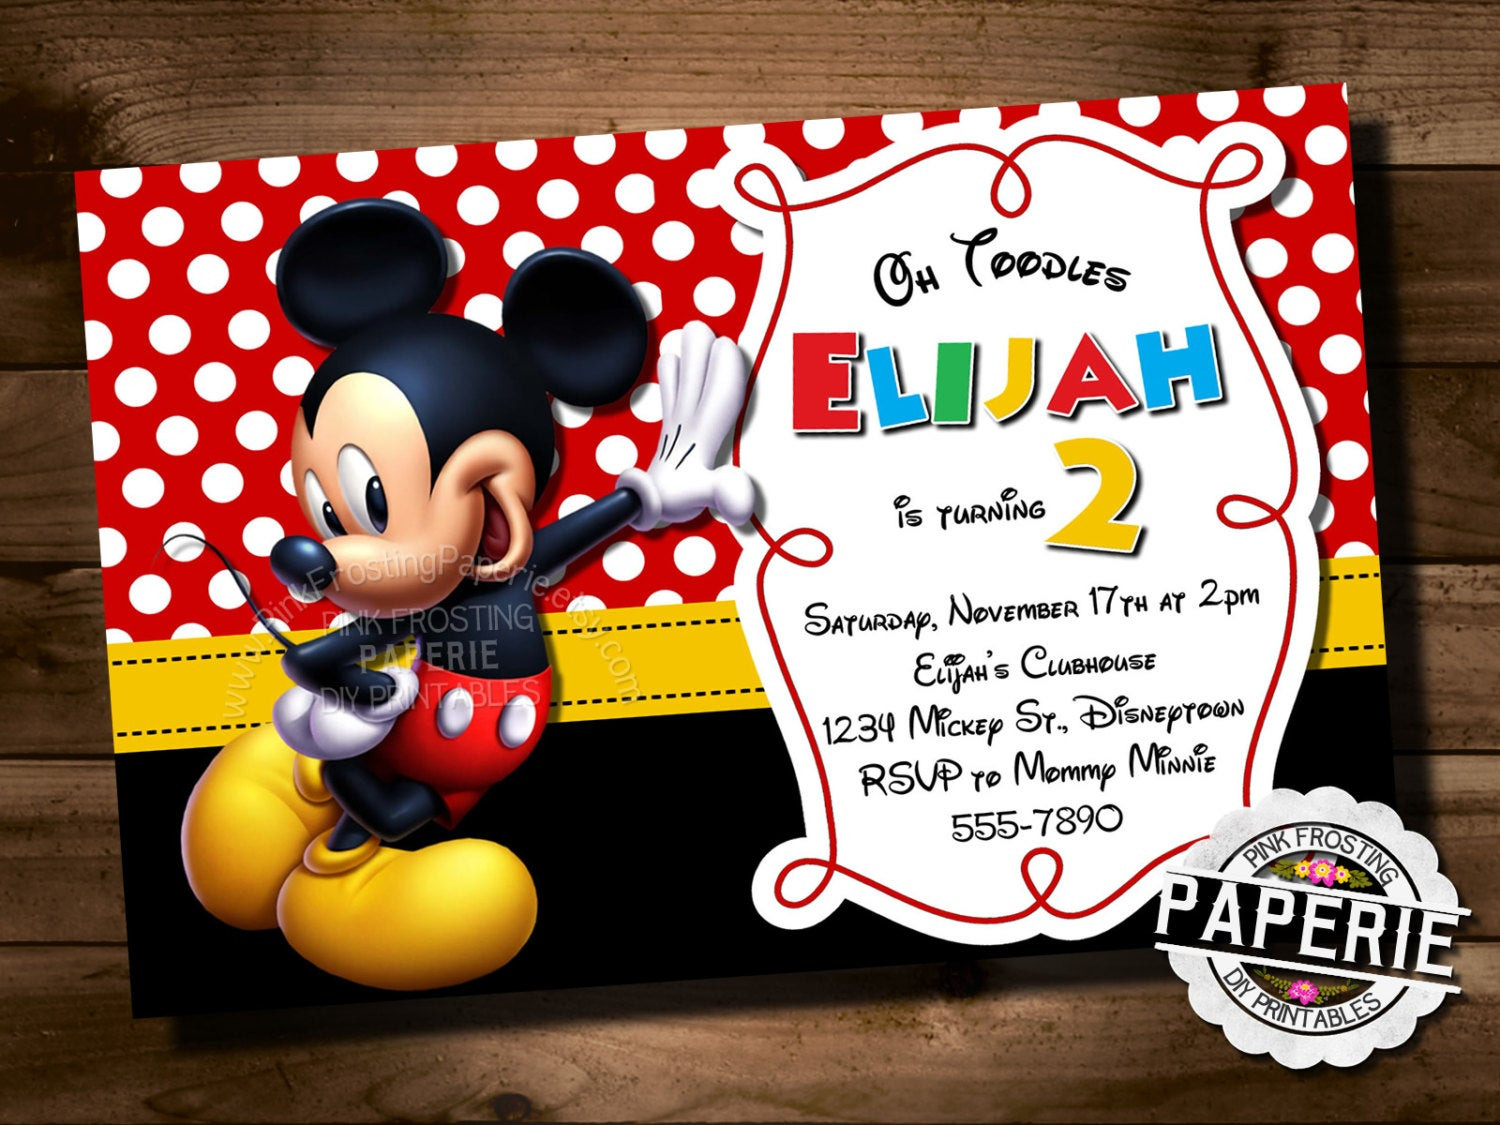 Mickey Mouse Clubhouse Birthday Party Invitations
 MICKEY MOUSE Birthday Invitation Mickey Mouse Clubhouse